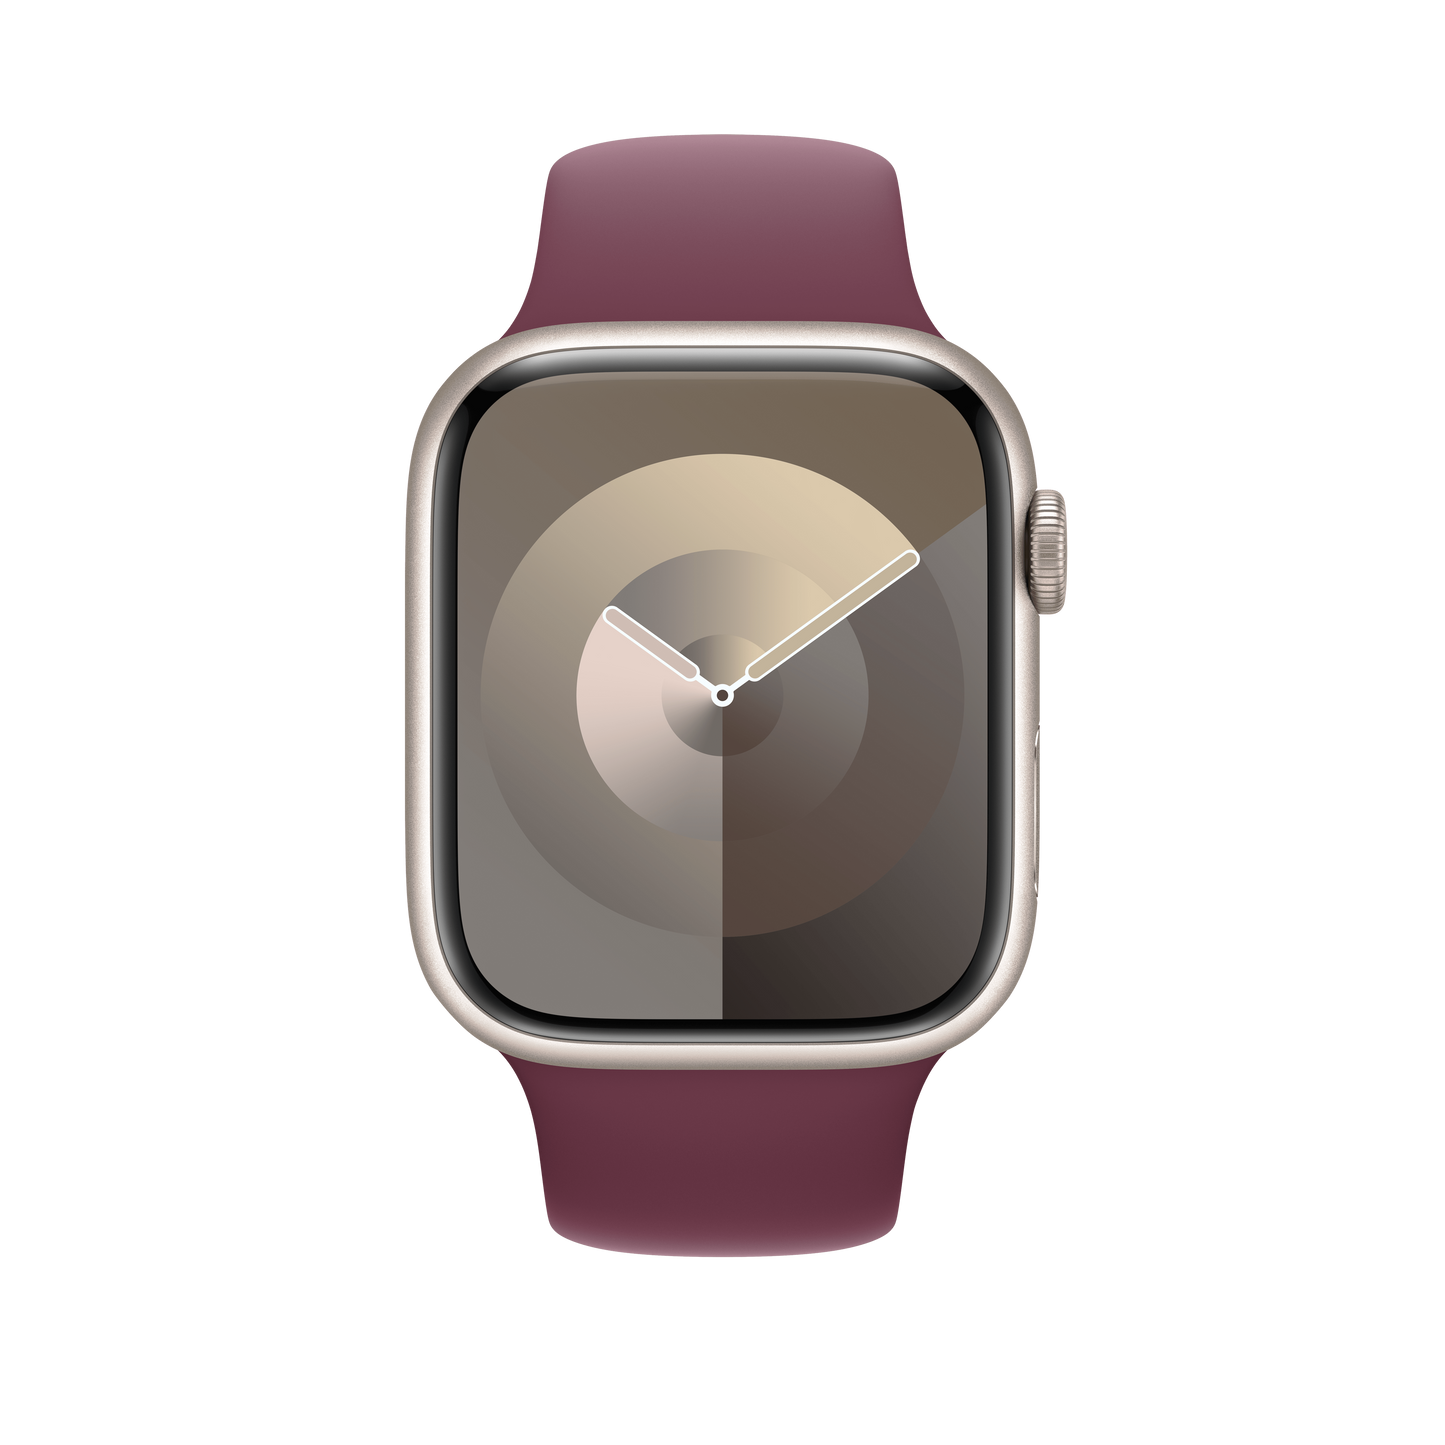 45mm Mulberry Sport Band - M/L